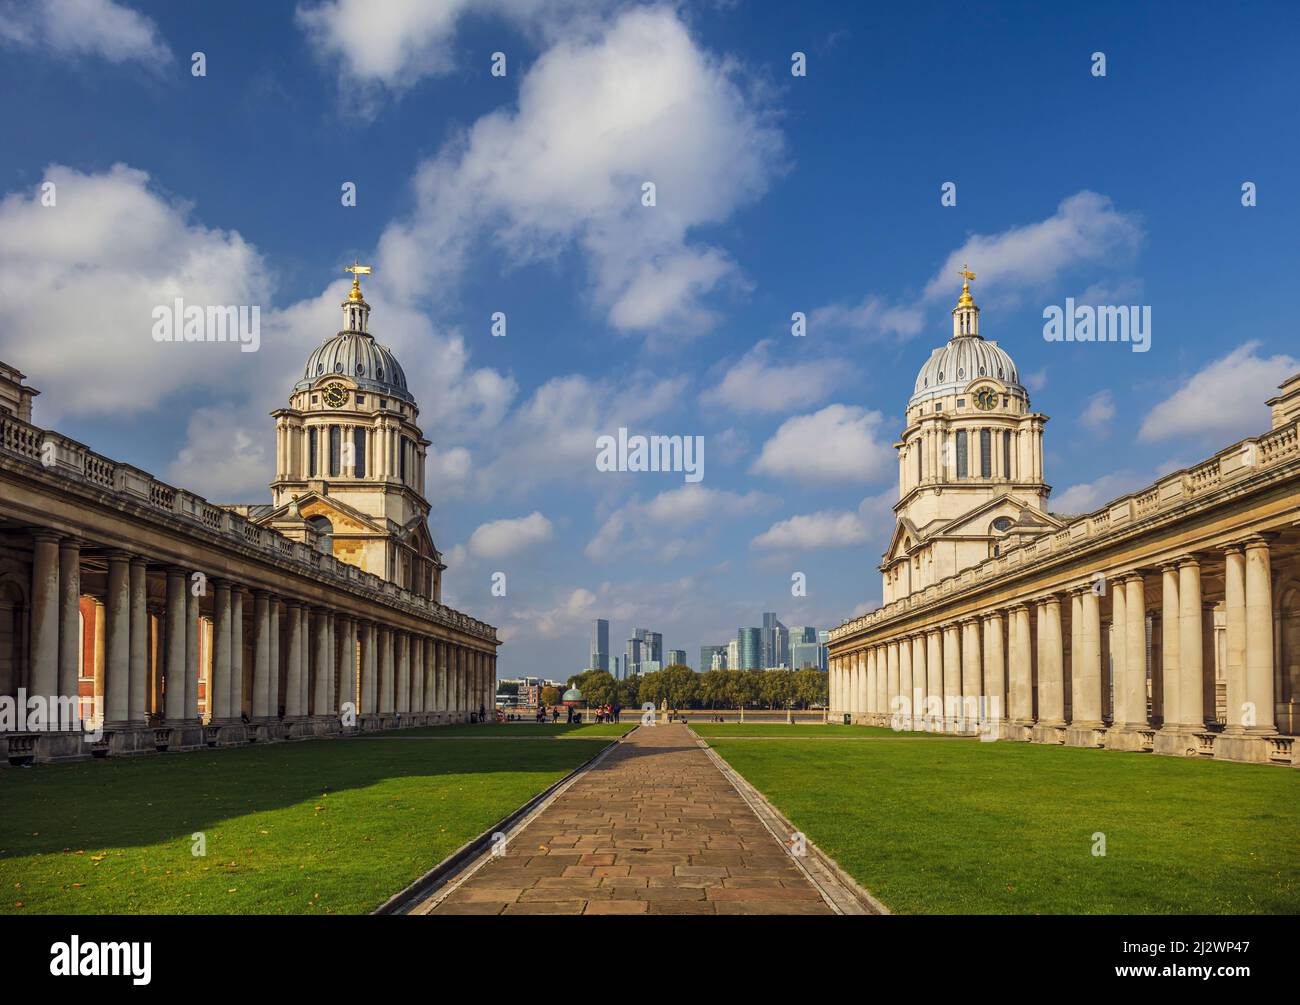 The Old Royal Naval College Greenwich, Londres. Banque D'Images